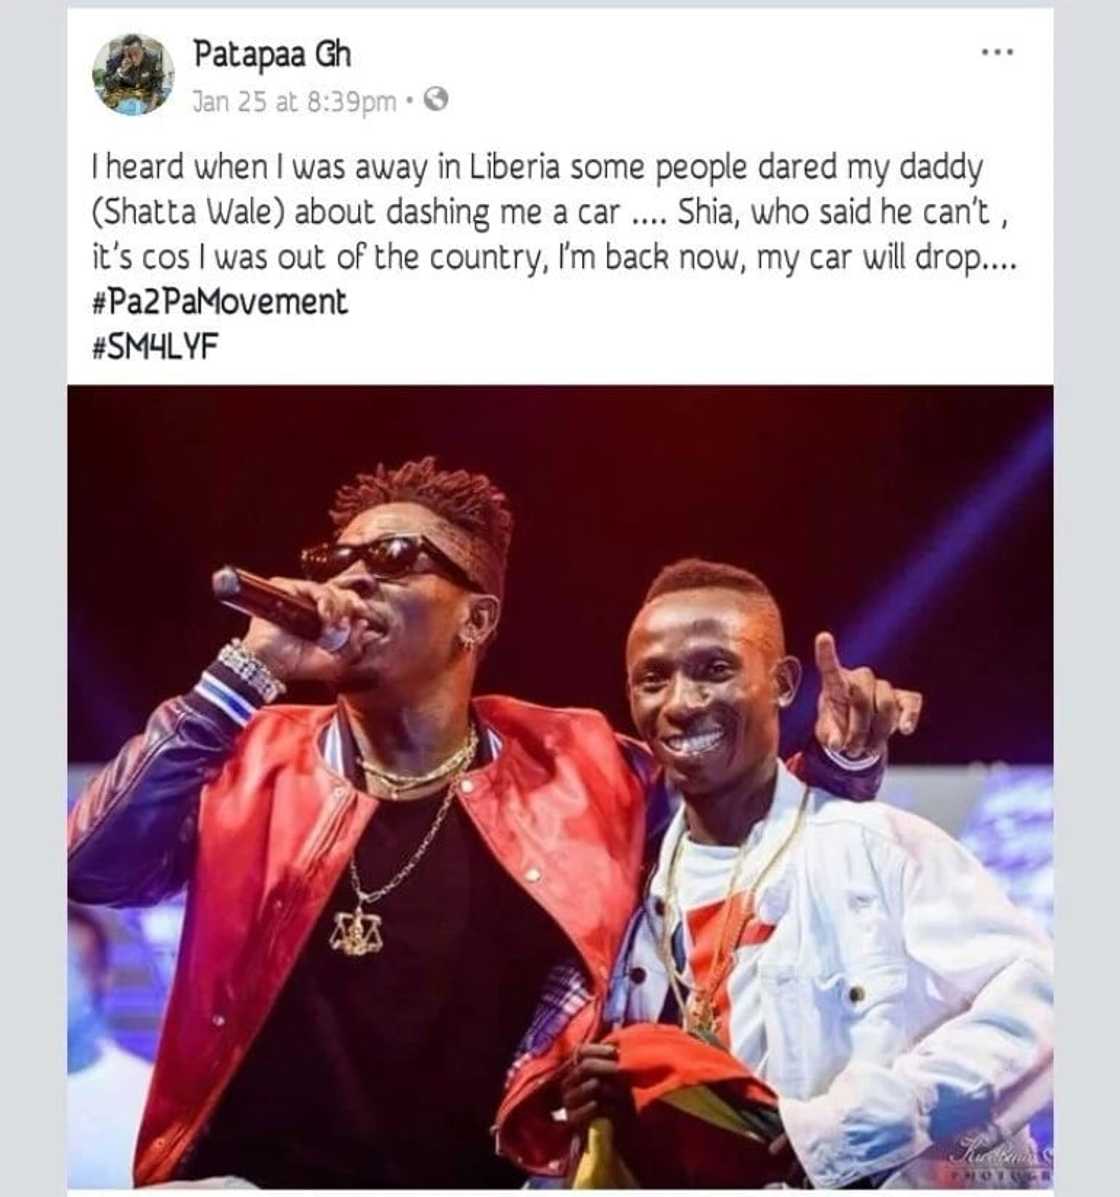 Patapaa's post for a car gift from Shatta Wale